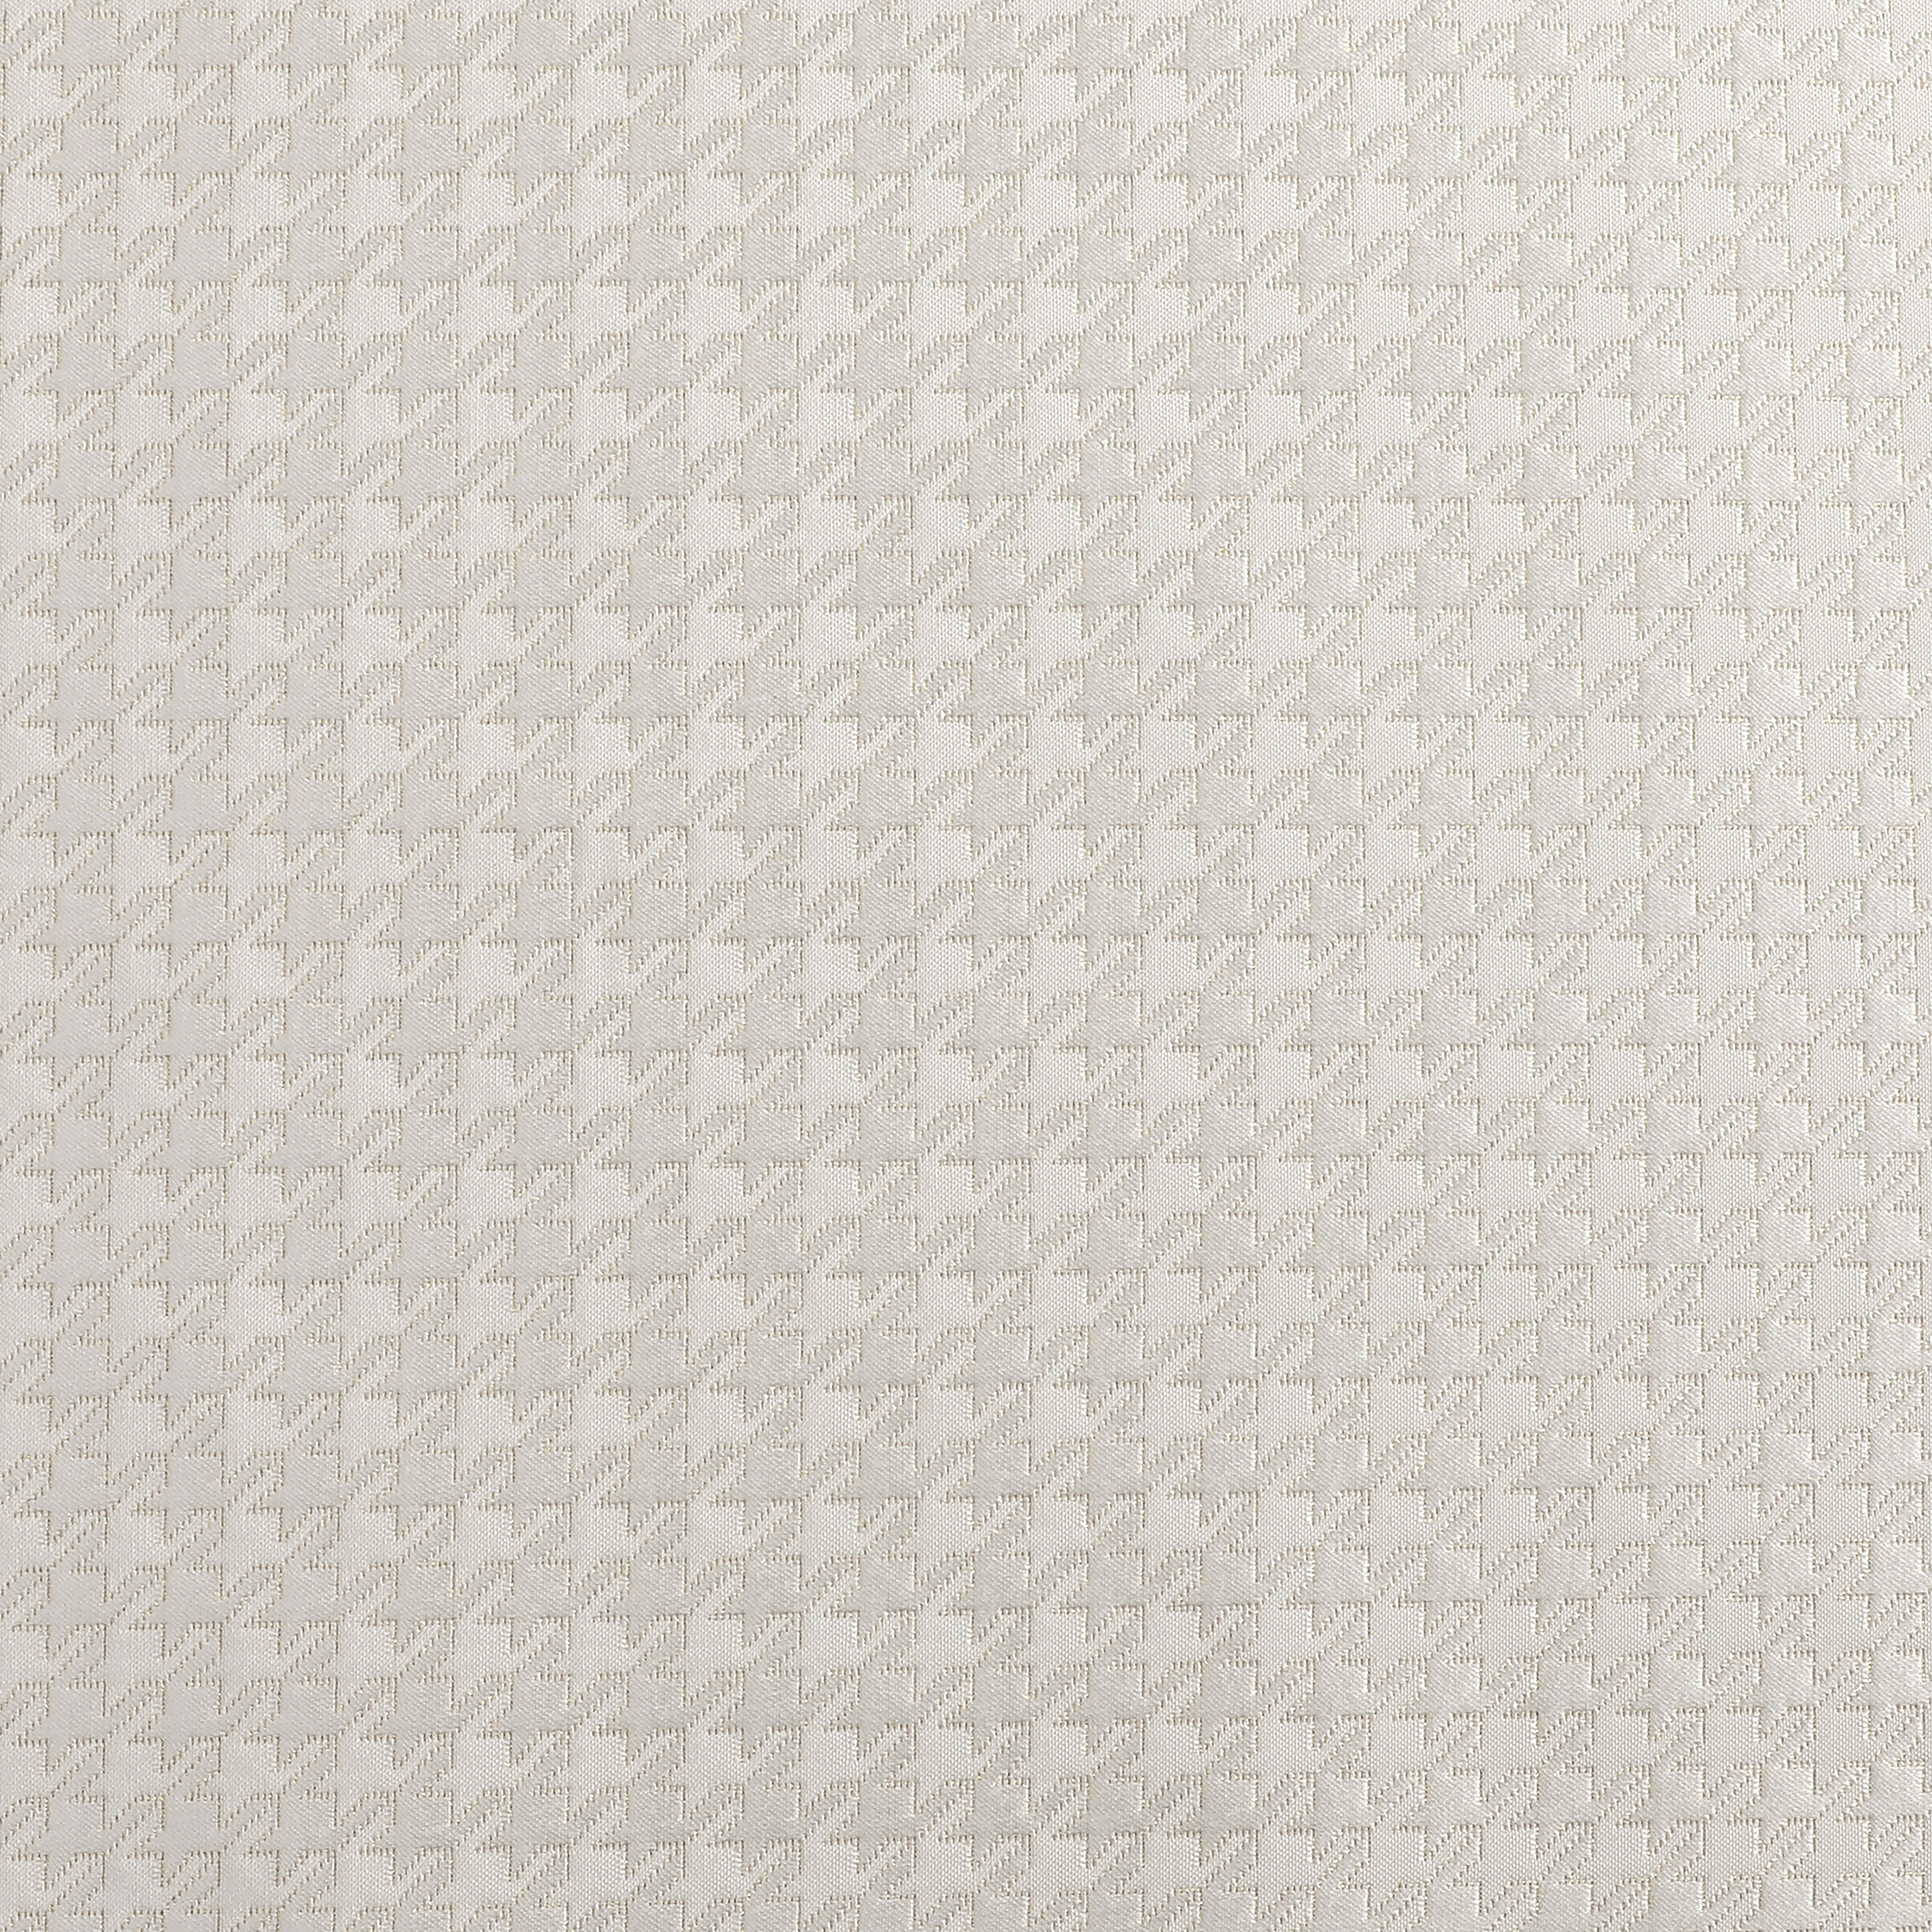 TC1374  White Gold Jacquard Houndstooth Tablecloth